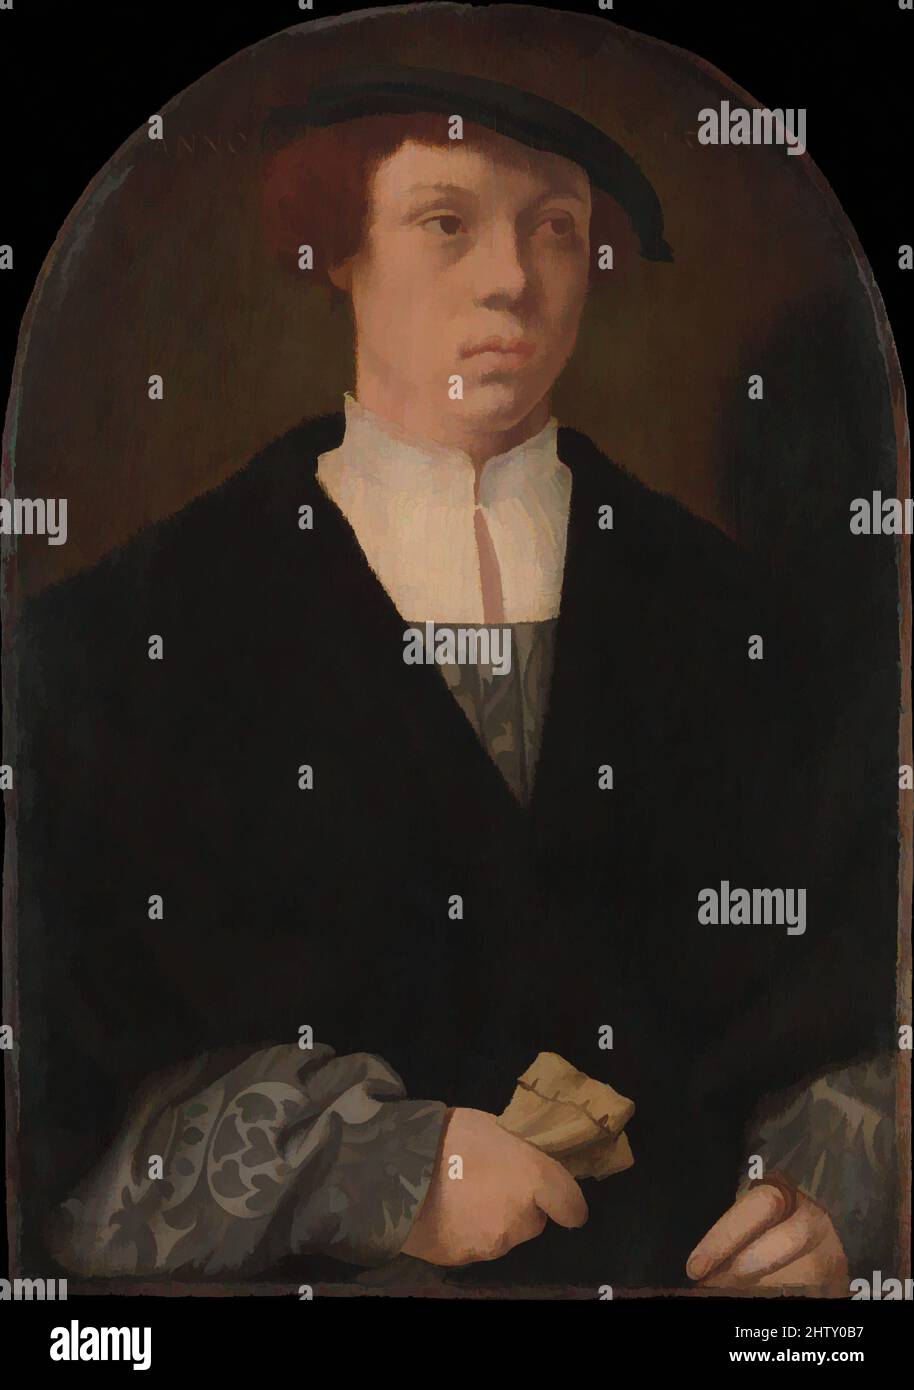 Art inspired by Portrait of a Man, 1533, Oil on oak, Overall, with arched top, 12 x 8 7/8 in. (30.5 x 22.5 cm); painted surface 11 3/4 x 8 1/8 in. (29.8 x 20.6 cm), Paintings, Barthel Bruyn the Elder (German, 1493–1555), The sitters wear costume typical of the upper-class citizenry of, Classic works modernized by Artotop with a splash of modernity. Shapes, color and value, eye-catching visual impact on art. Emotions through freedom of artworks in a contemporary way. A timeless message pursuing a wildly creative new direction. Artists turning to the digital medium and creating the Artotop NFT Stock Photo